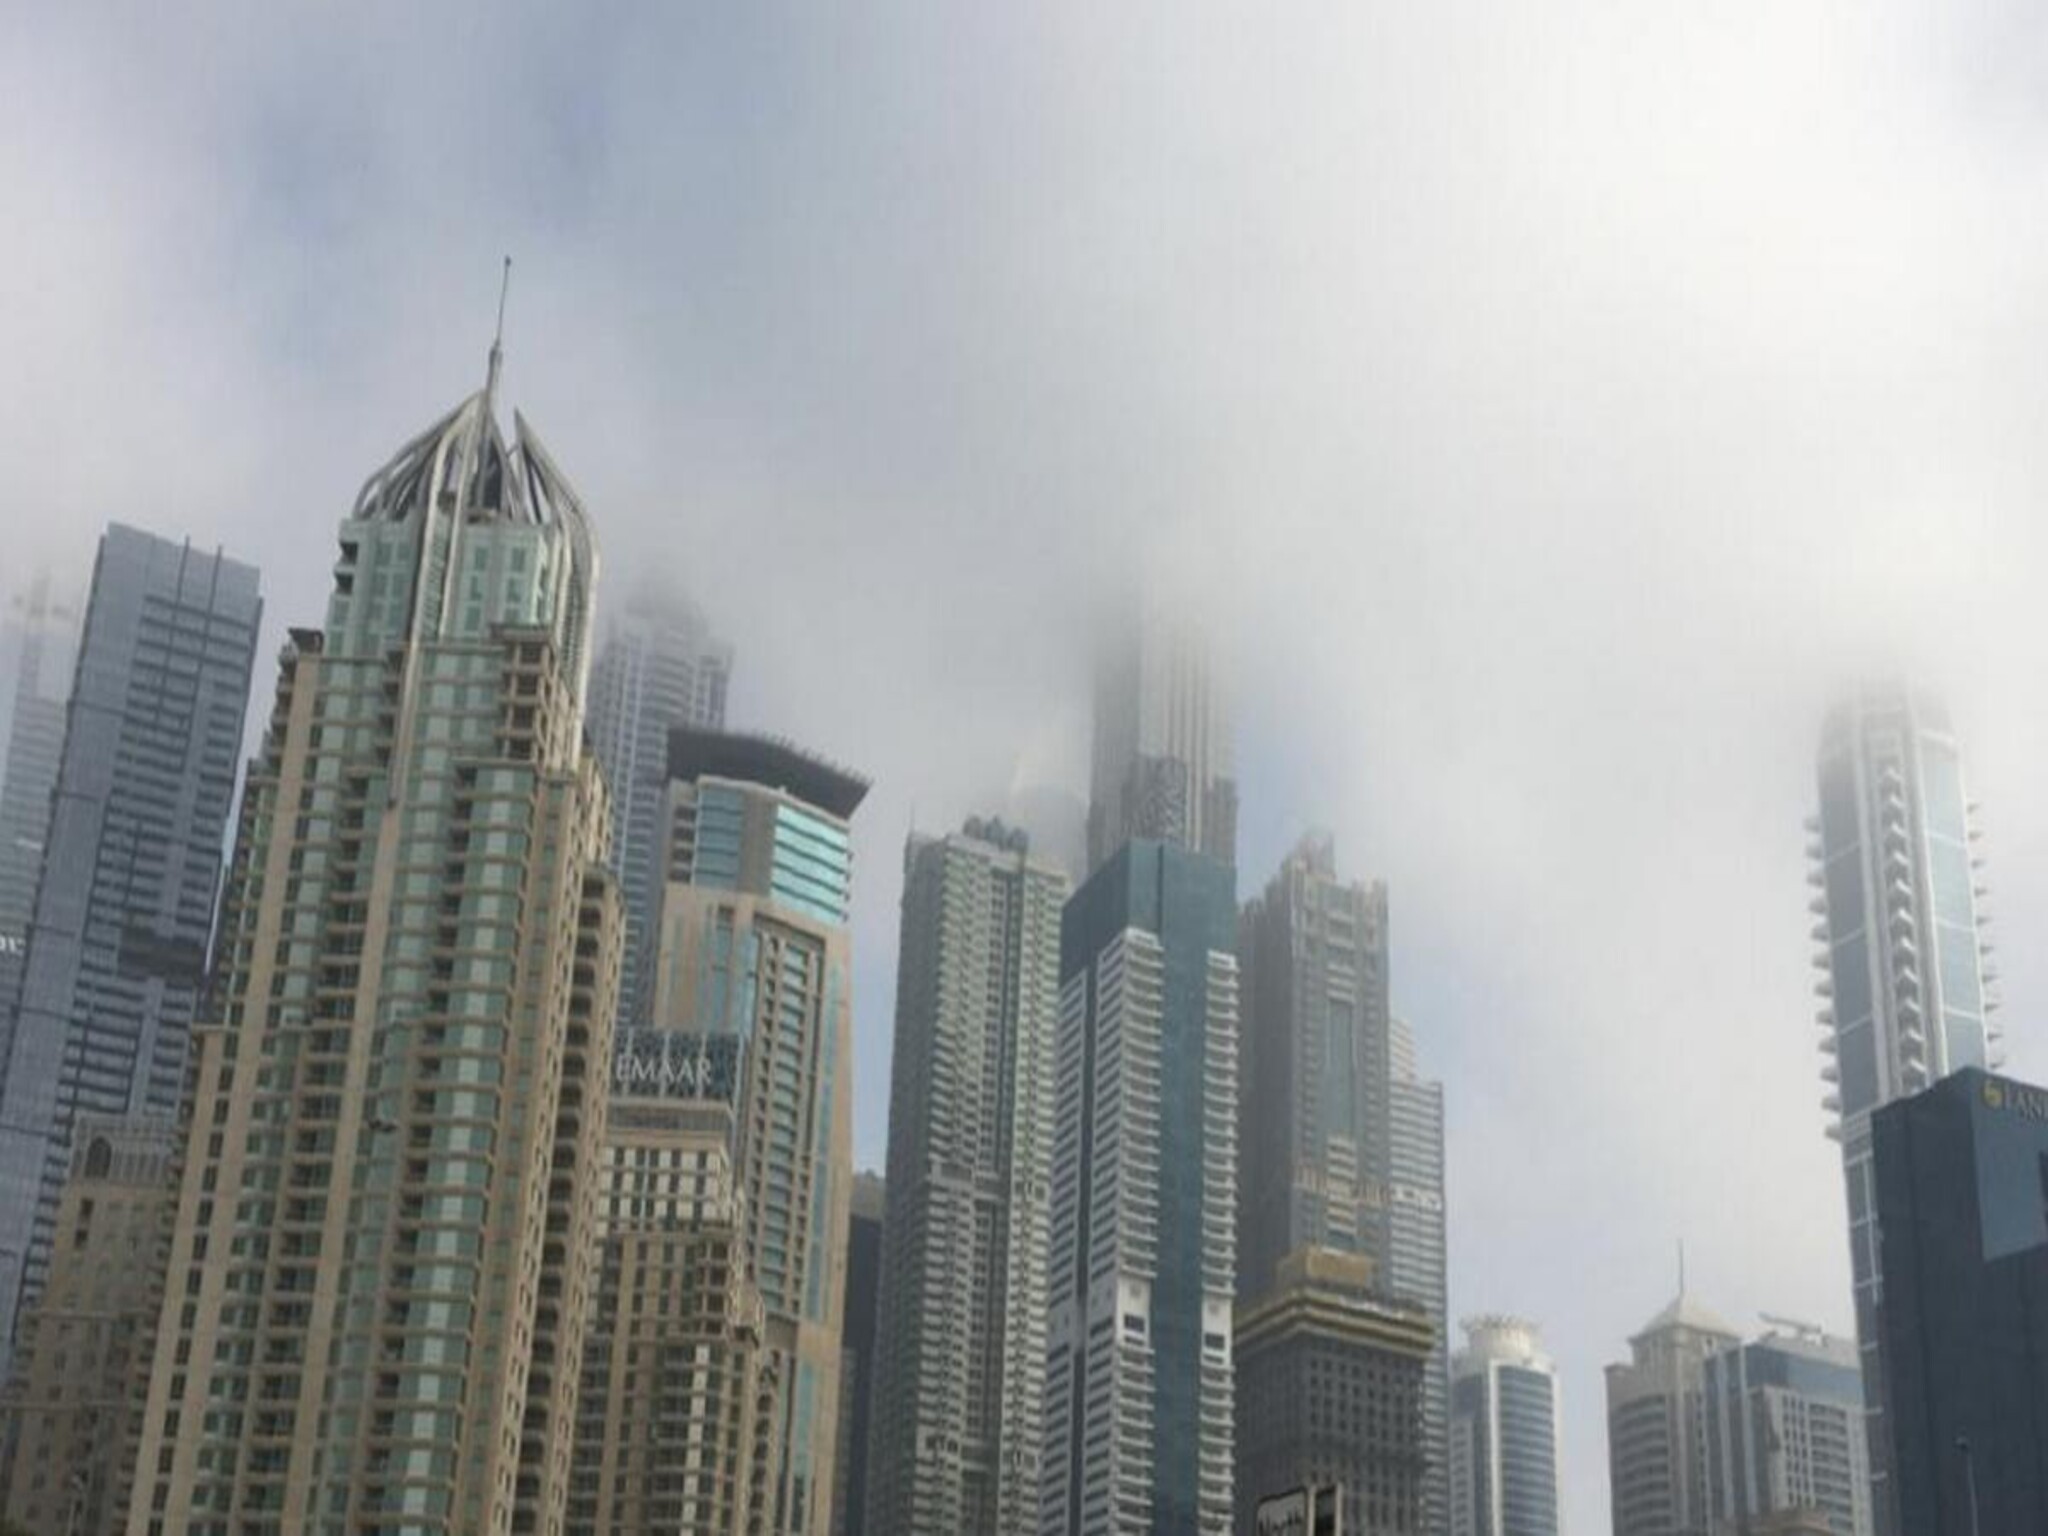 Yellow alert in the UAE to warn of rain and dust